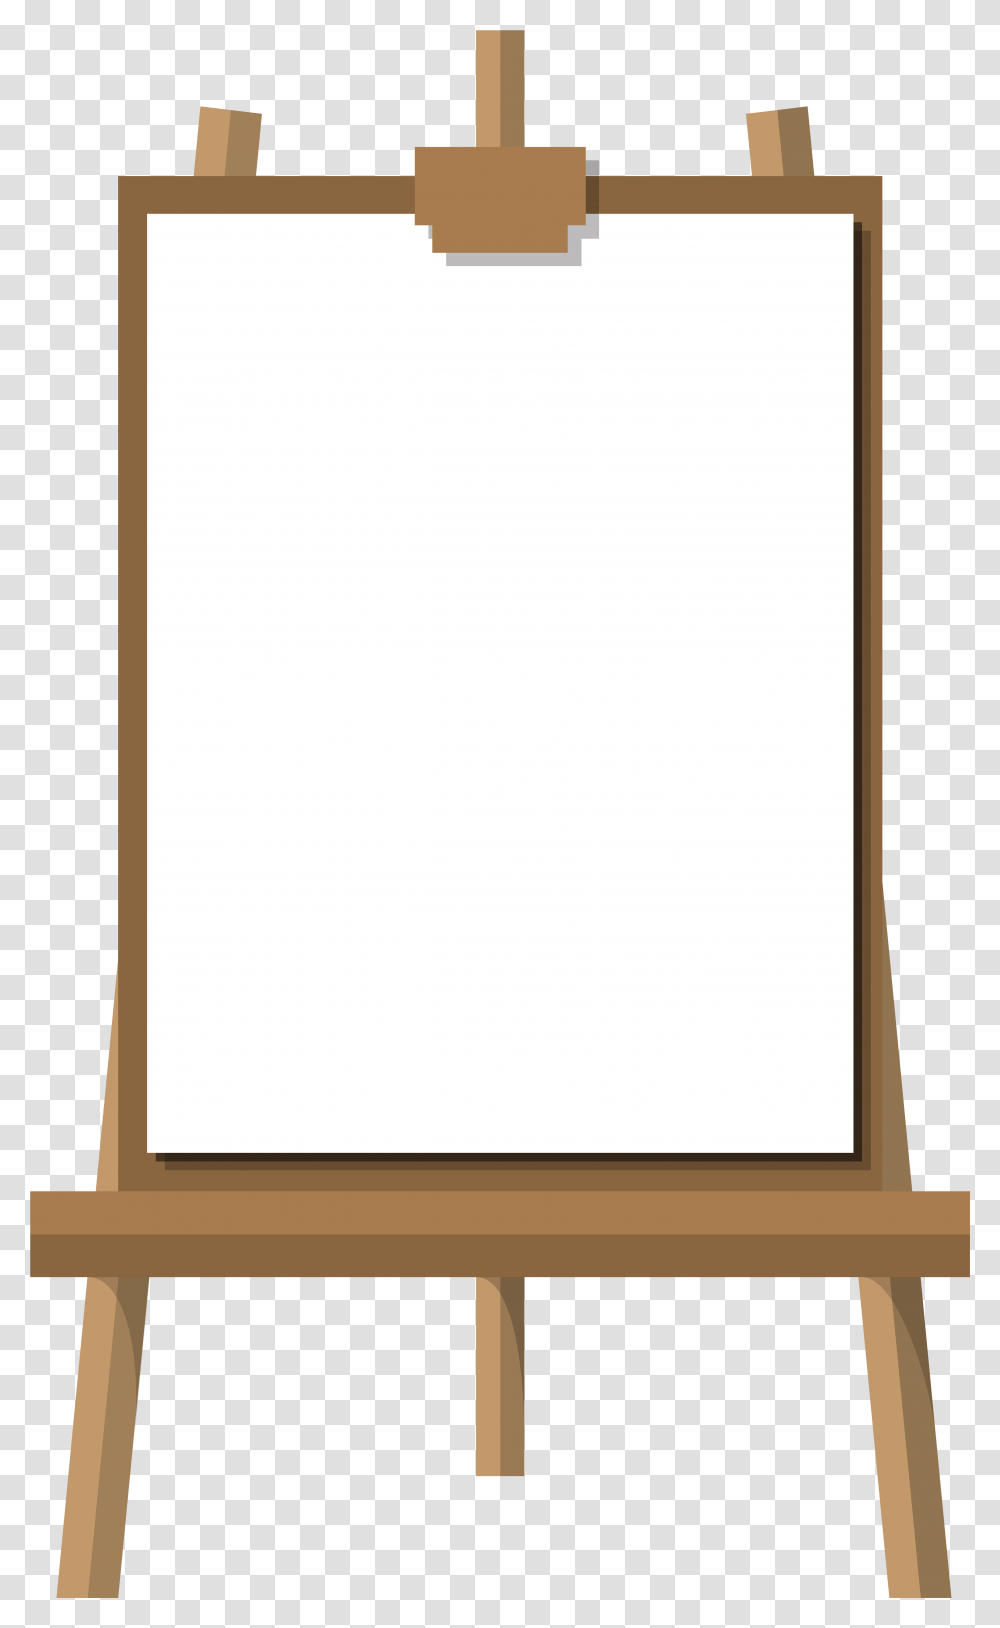 Drawing Board Clip Art Image Art Drawing Board, Mirror, White Board Transparent Png